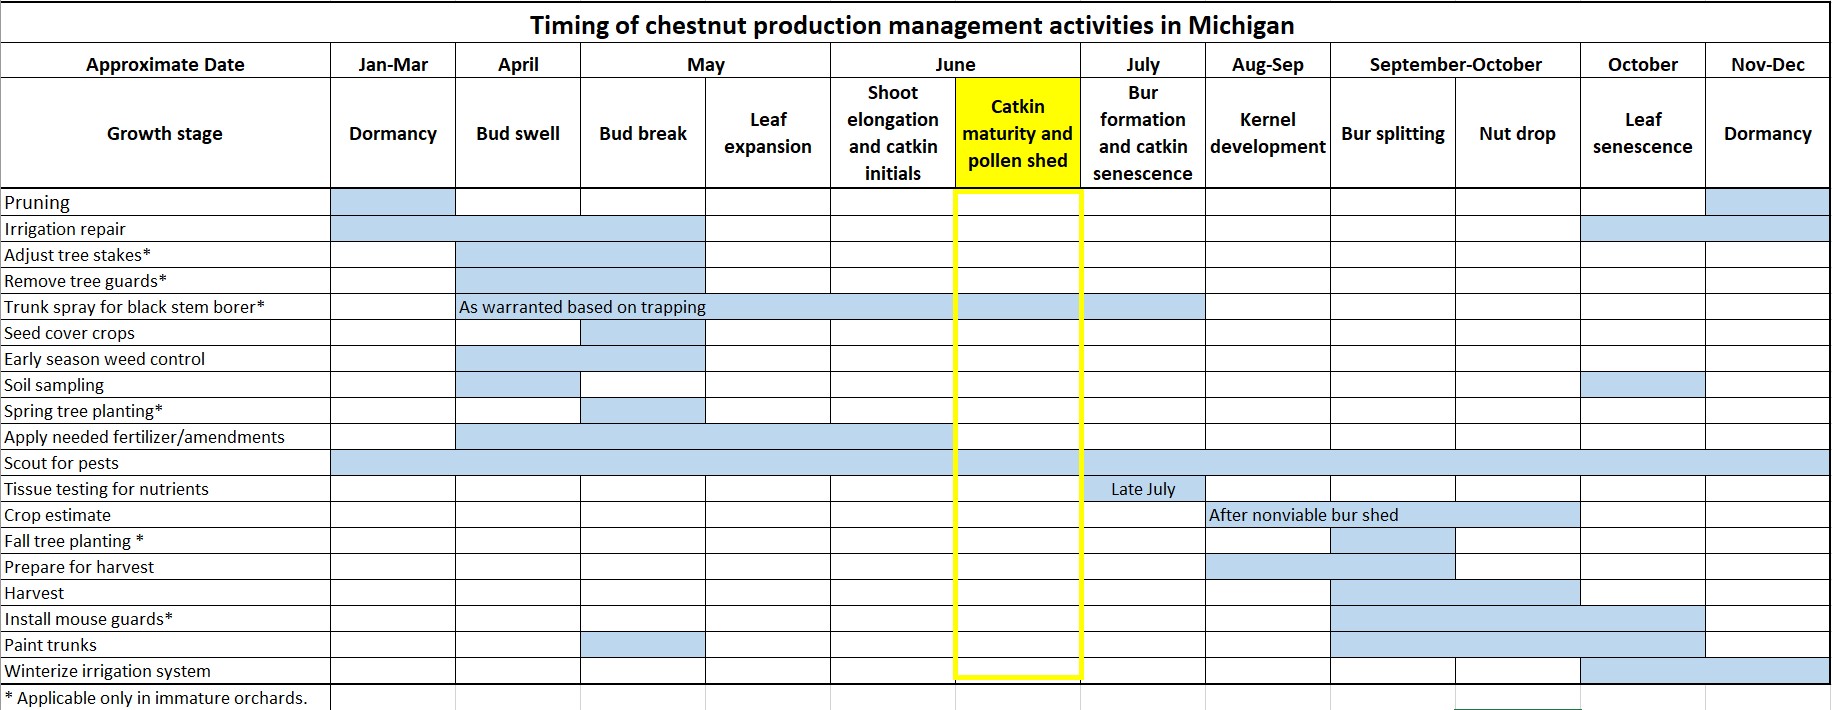 Graph showing the timing of chestnut production